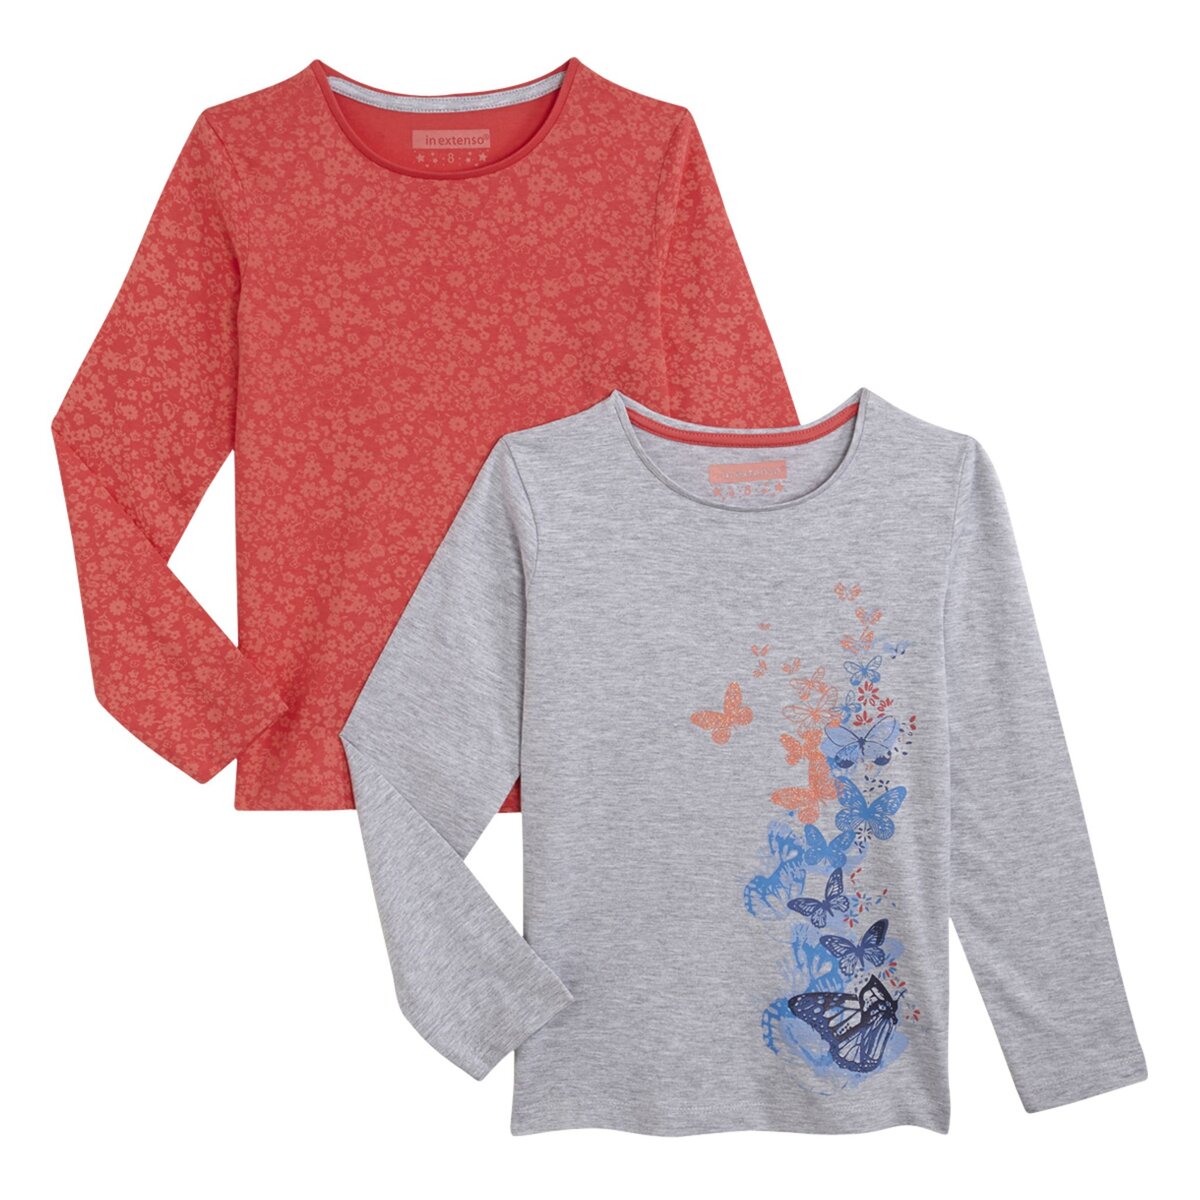 IN EXTENSO Lot de 2 tee-shirts manches longues Fille